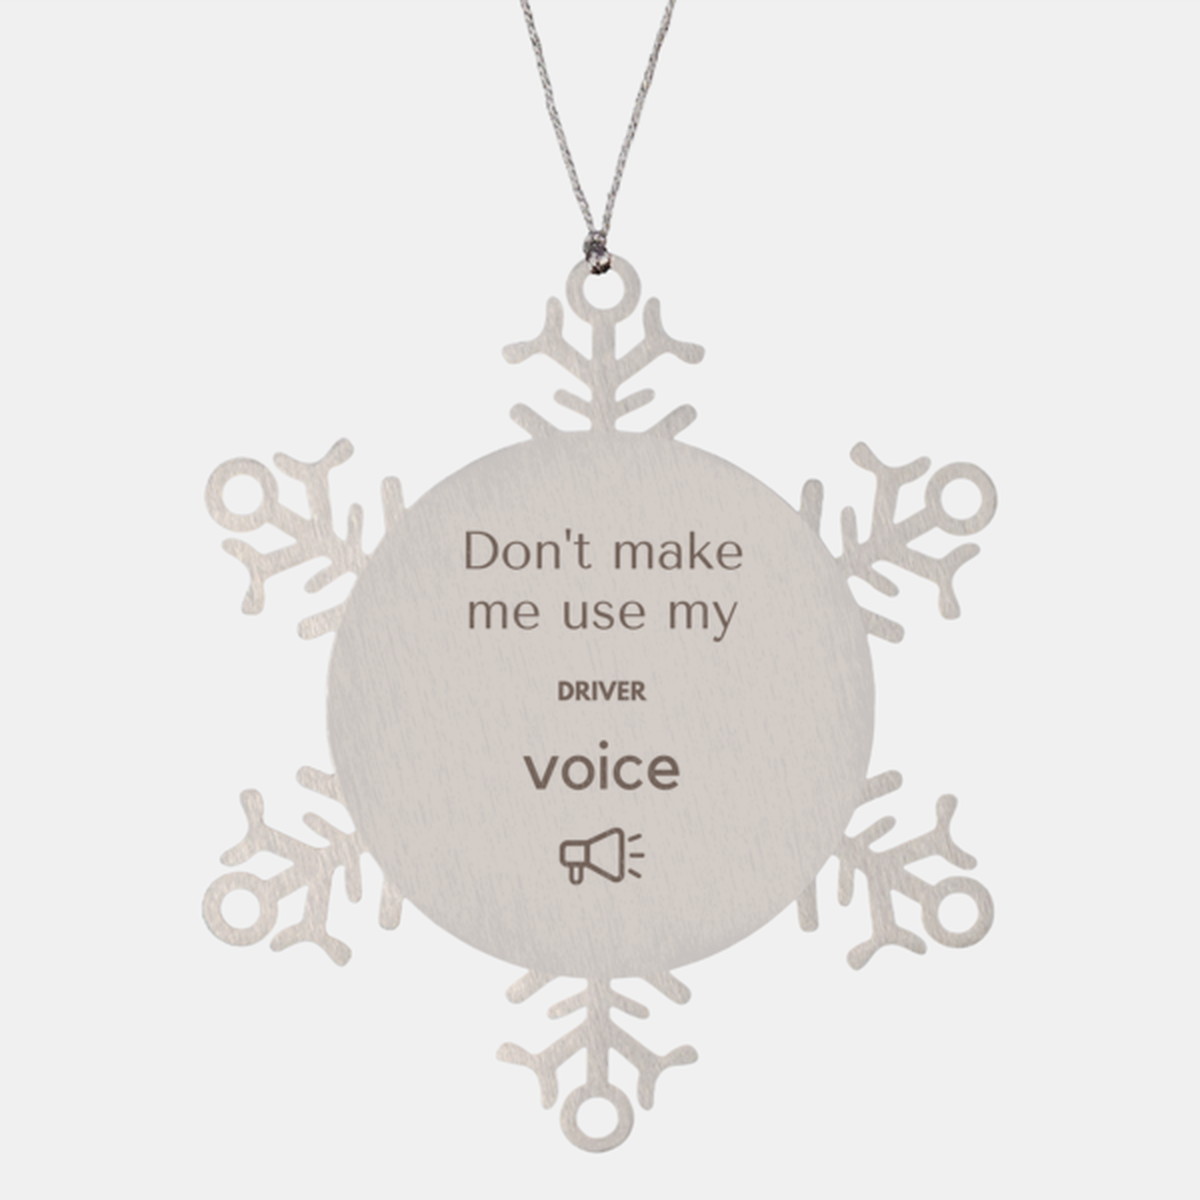 Don't make me use my Driver voice, Sarcasm Driver Ornament Gifts, Christmas Driver Snowflake Ornament Unique Gifts For Driver Coworkers, Men, Women, Colleague, Friends